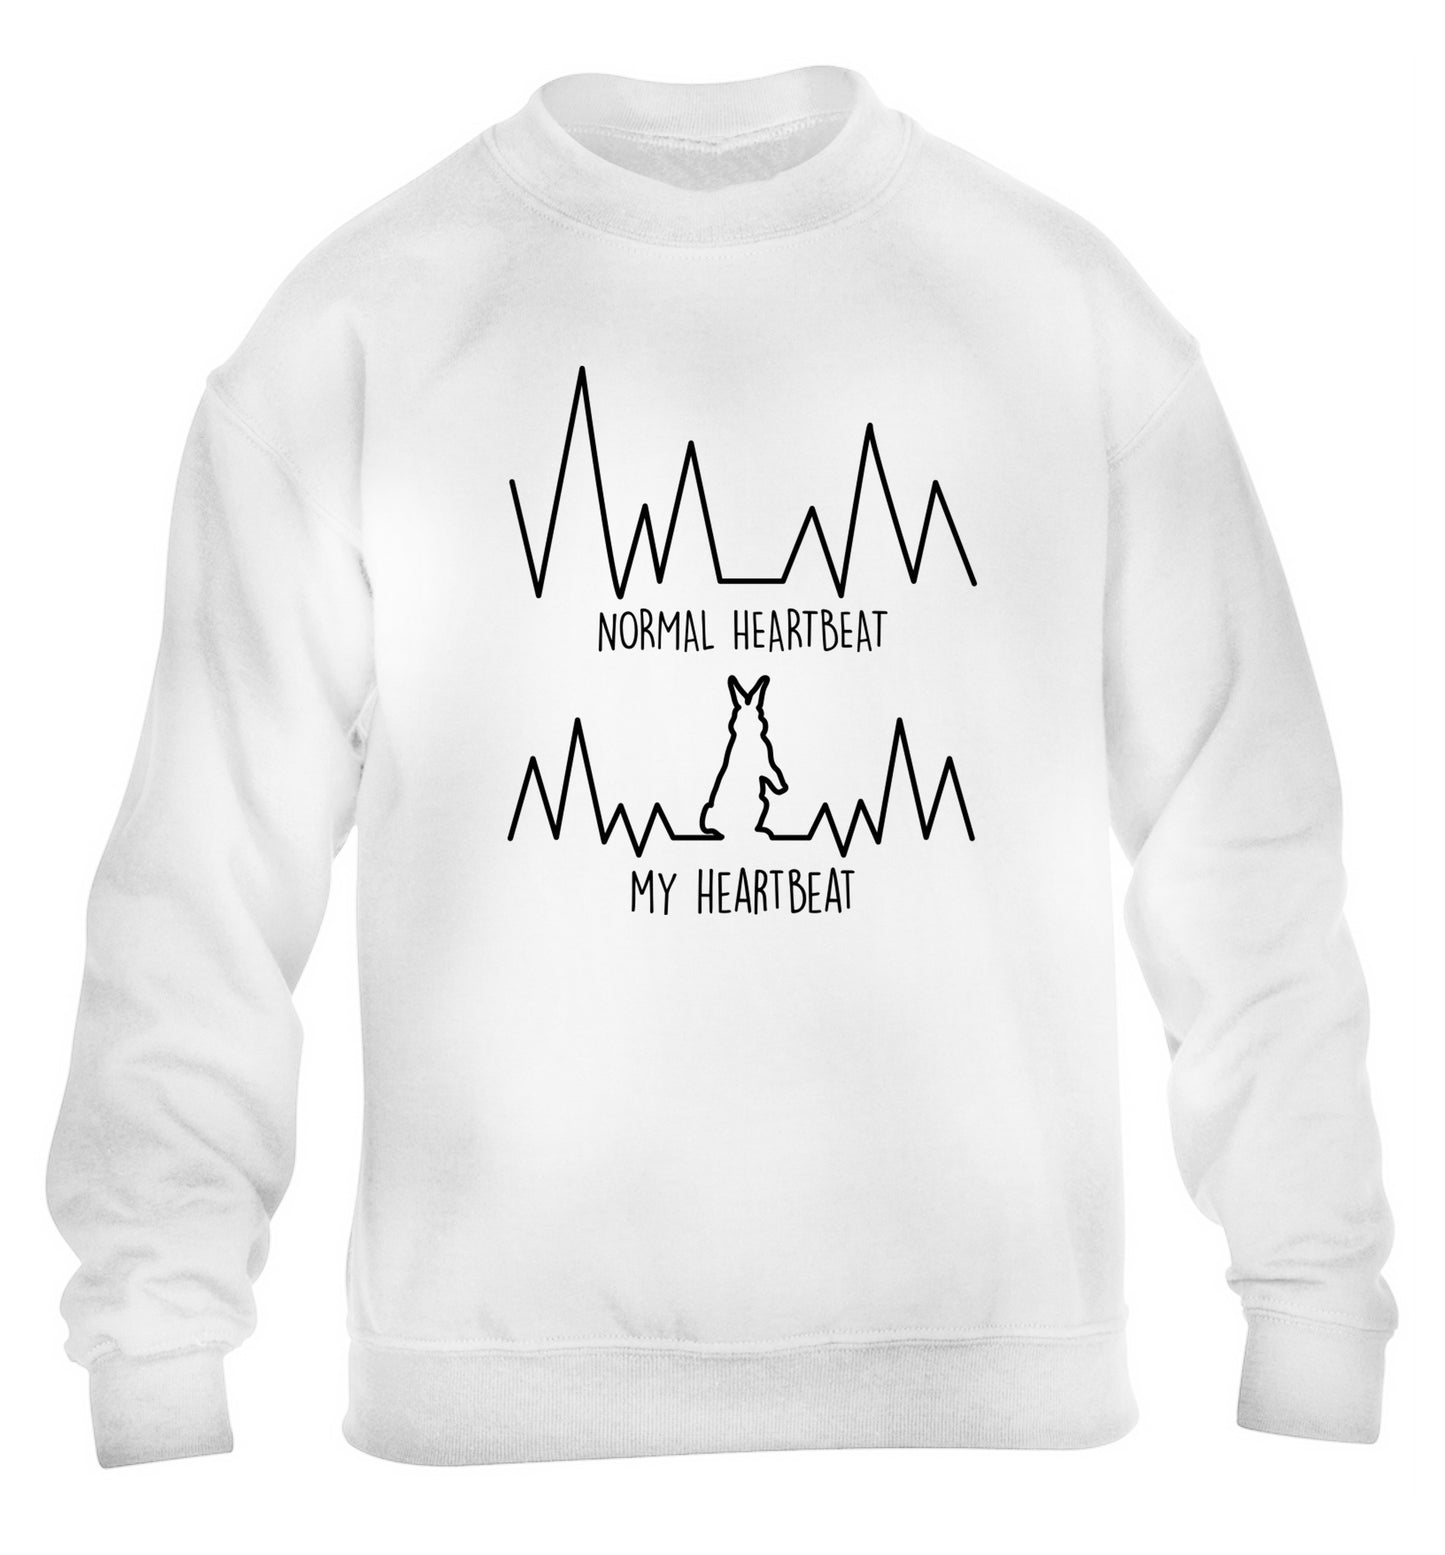 Normal heartbeat, my heartbeat rabbit lover children's white  sweater 12-14 Years